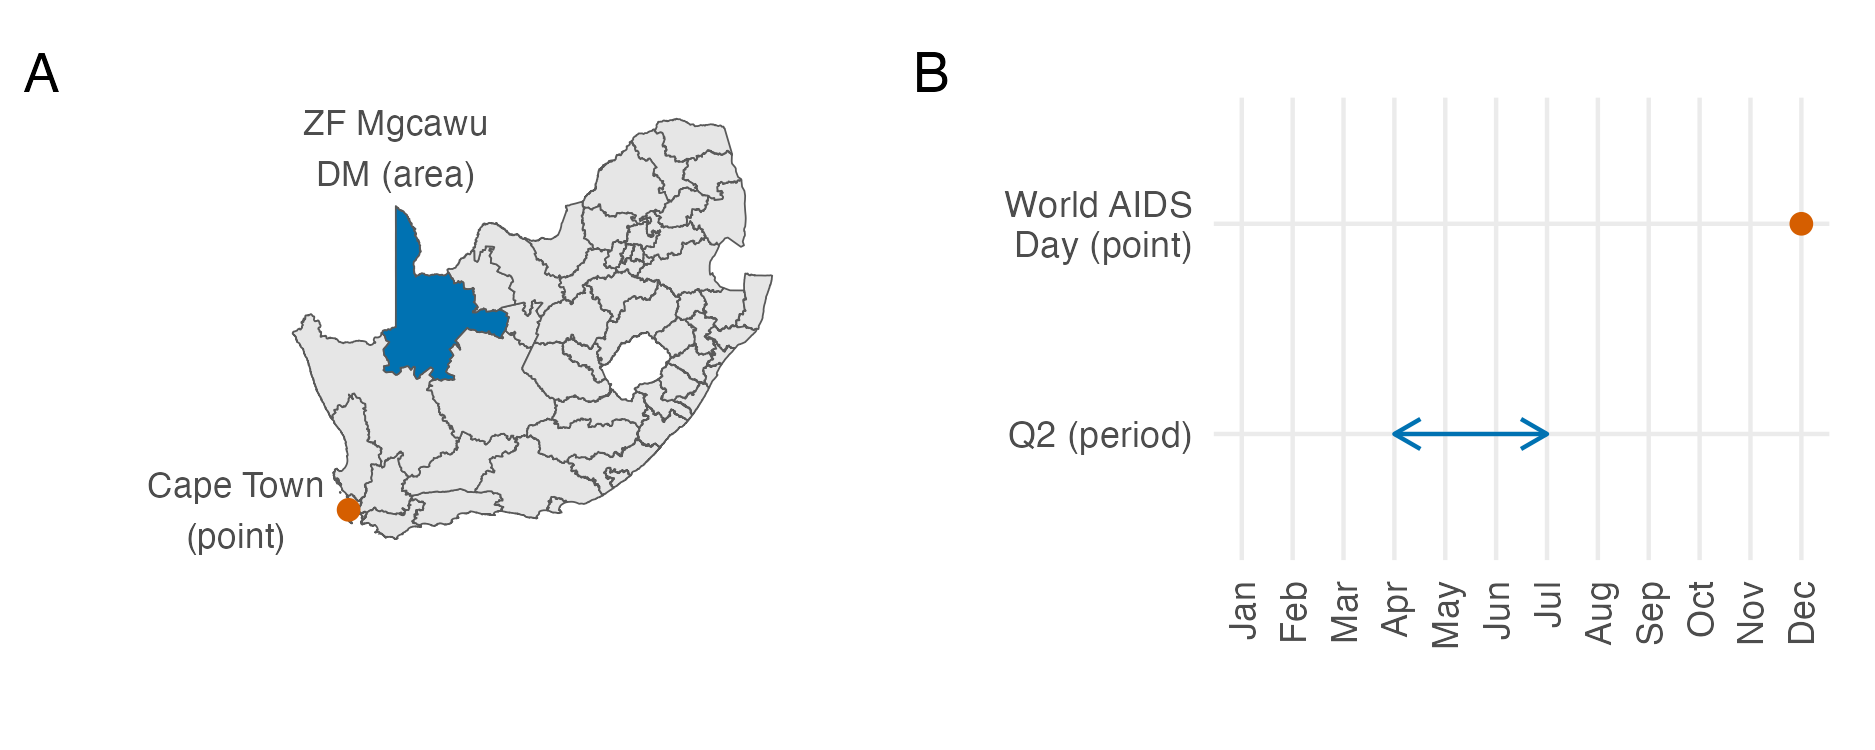 In Panel A, the spatial location of Cape Town in South Africa can be considered a point, and the ZF Mgcawu District Municipality (DM) can be considered as an an area. In Panel B, World AIDS Day, designated on the 1st of December every year, can be considered a point in time, whereas the second fiscal quarter, running through April, May and June, and denoted by Q2 represents a period of time. In reality, both Cape Town and World AIDS Day are areas, rather than true point locations. Instances of infinitesimal point locations in everyday life, outside of mathematical abstraction, are rare.